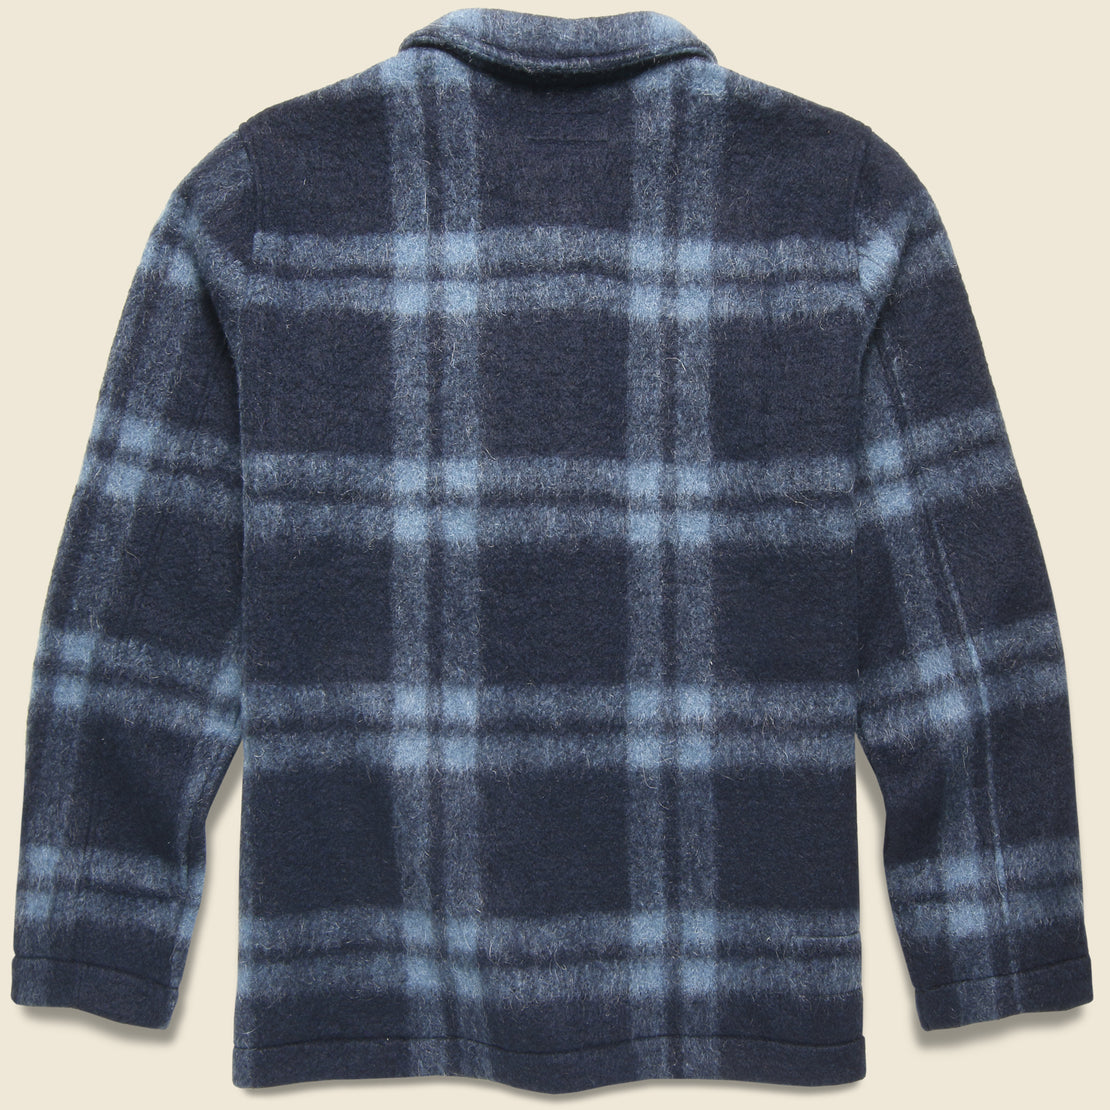 Soft Wool Field Jacket - Navy Plaid - Universal Works - STAG Provisions - Outerwear - Coat / Jacket